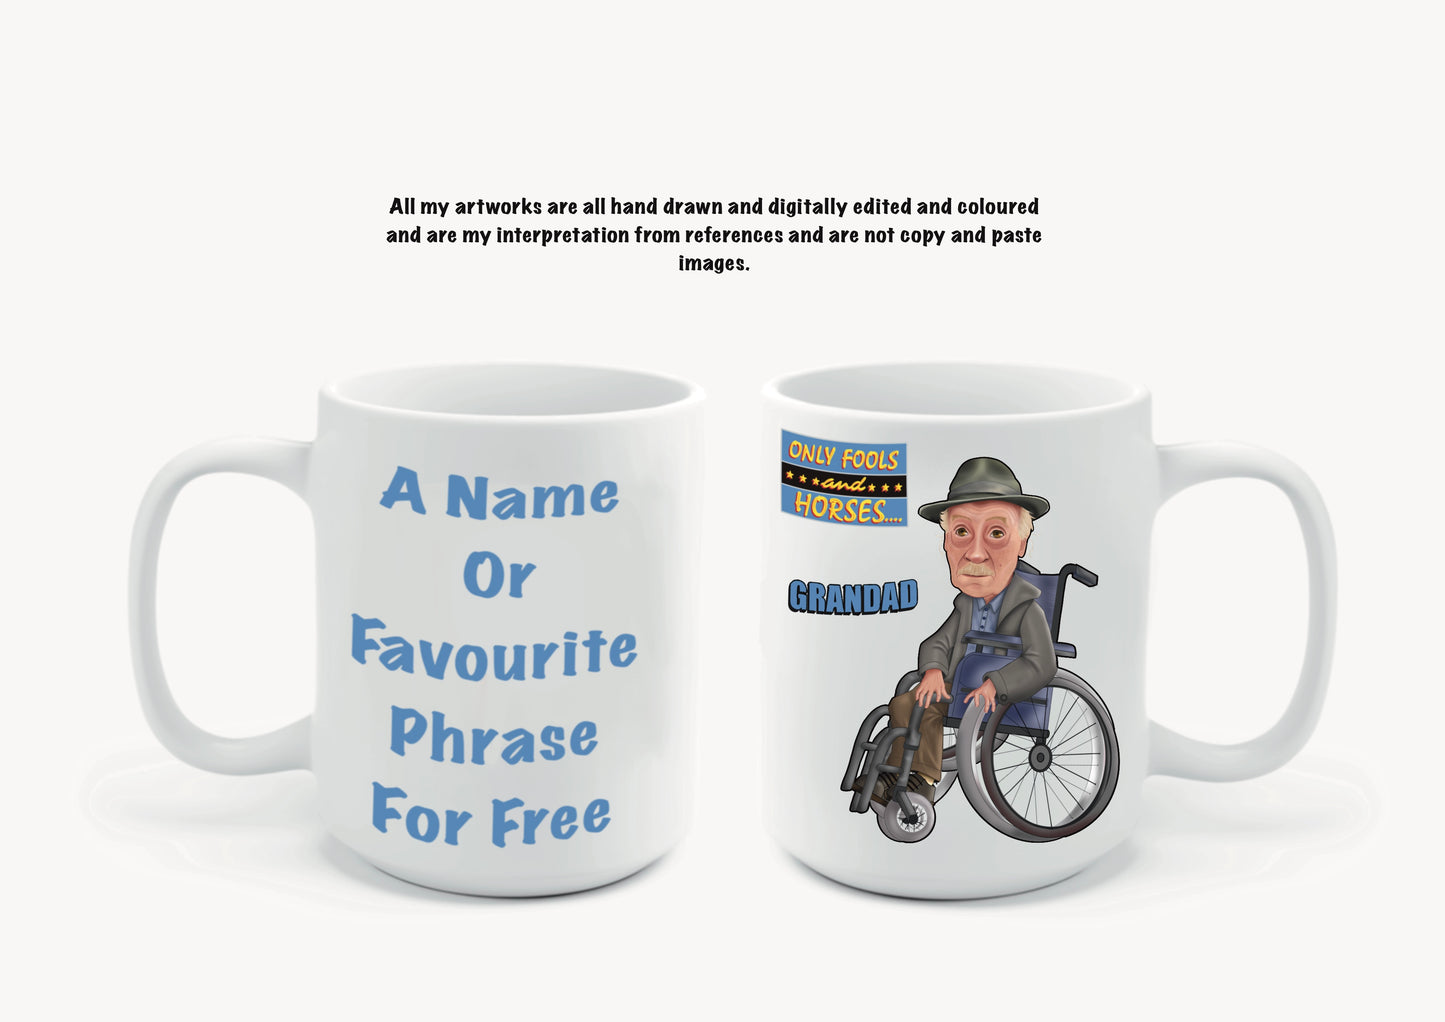 Only Fools And Horses Mugs Grandad #aswideastheclyde